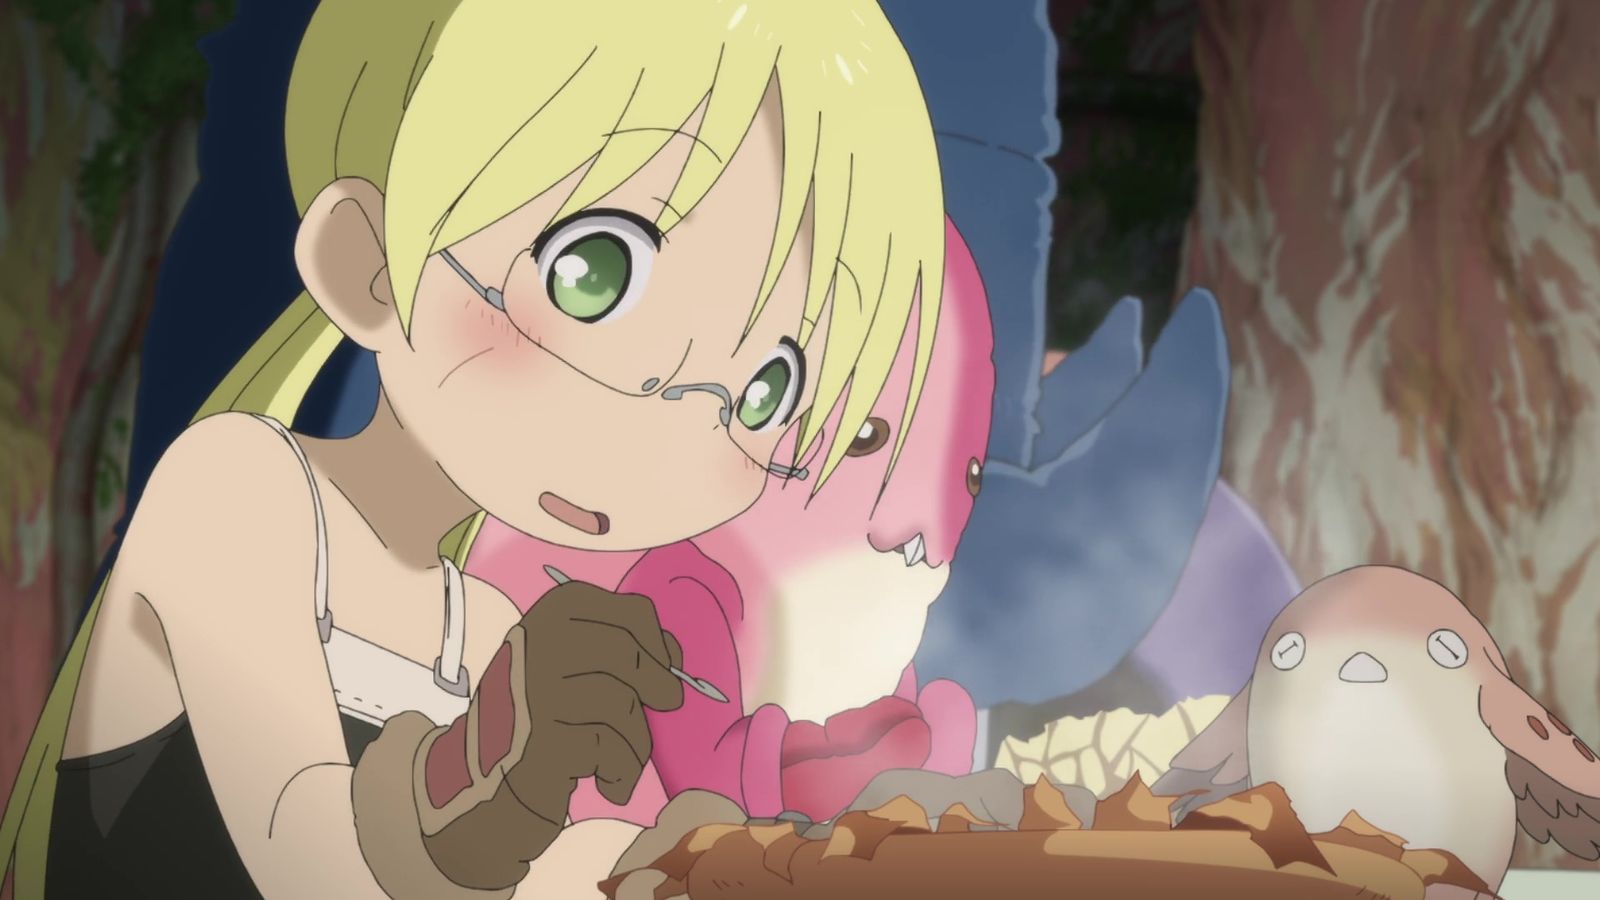 Who are Made in Abyss’ Voice Actors? Who is Riko's Voice Actor in Made in Abyss?